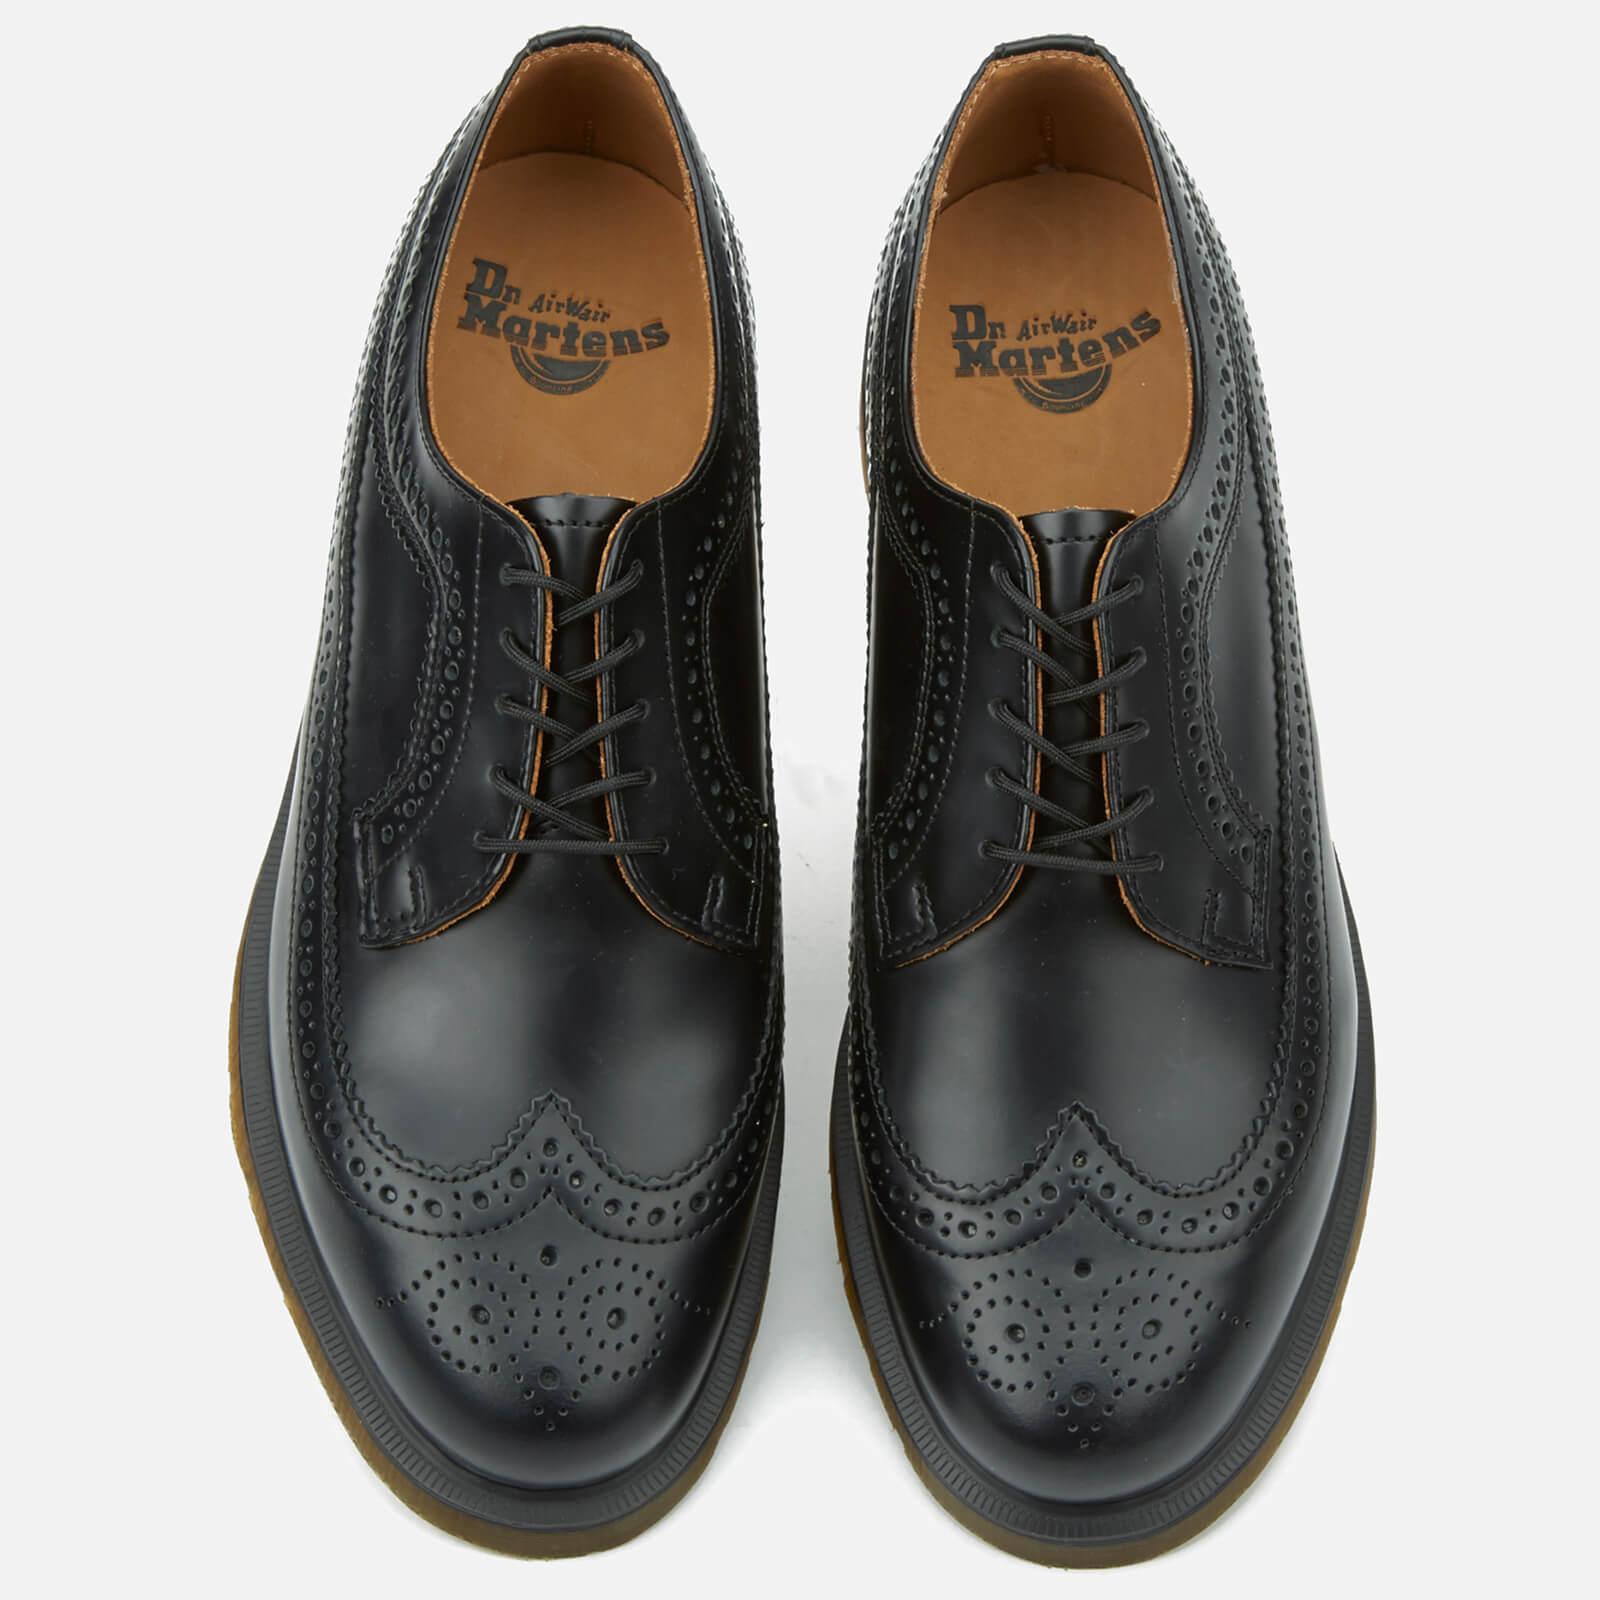 Dr. Martens 3989 Pw Smooth Leather Wingtip Brogues in Black for Men - Lyst